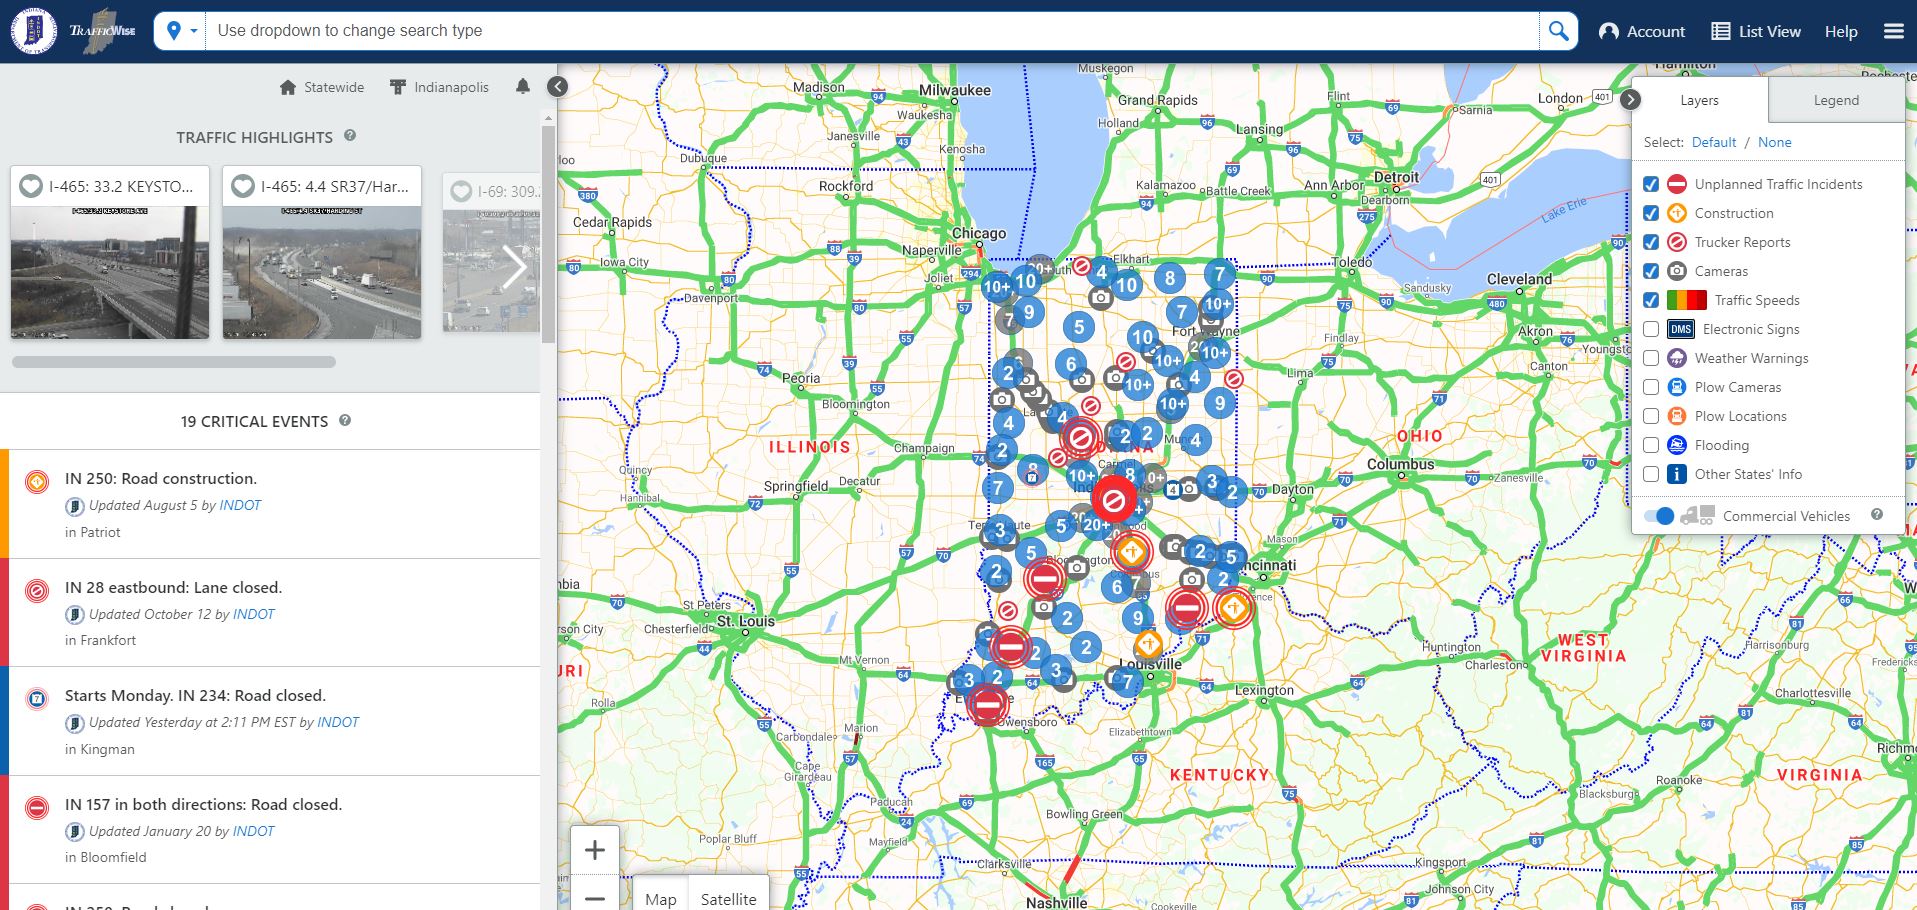 Indiana Dot Road Conditions Map Indot: Travel Information